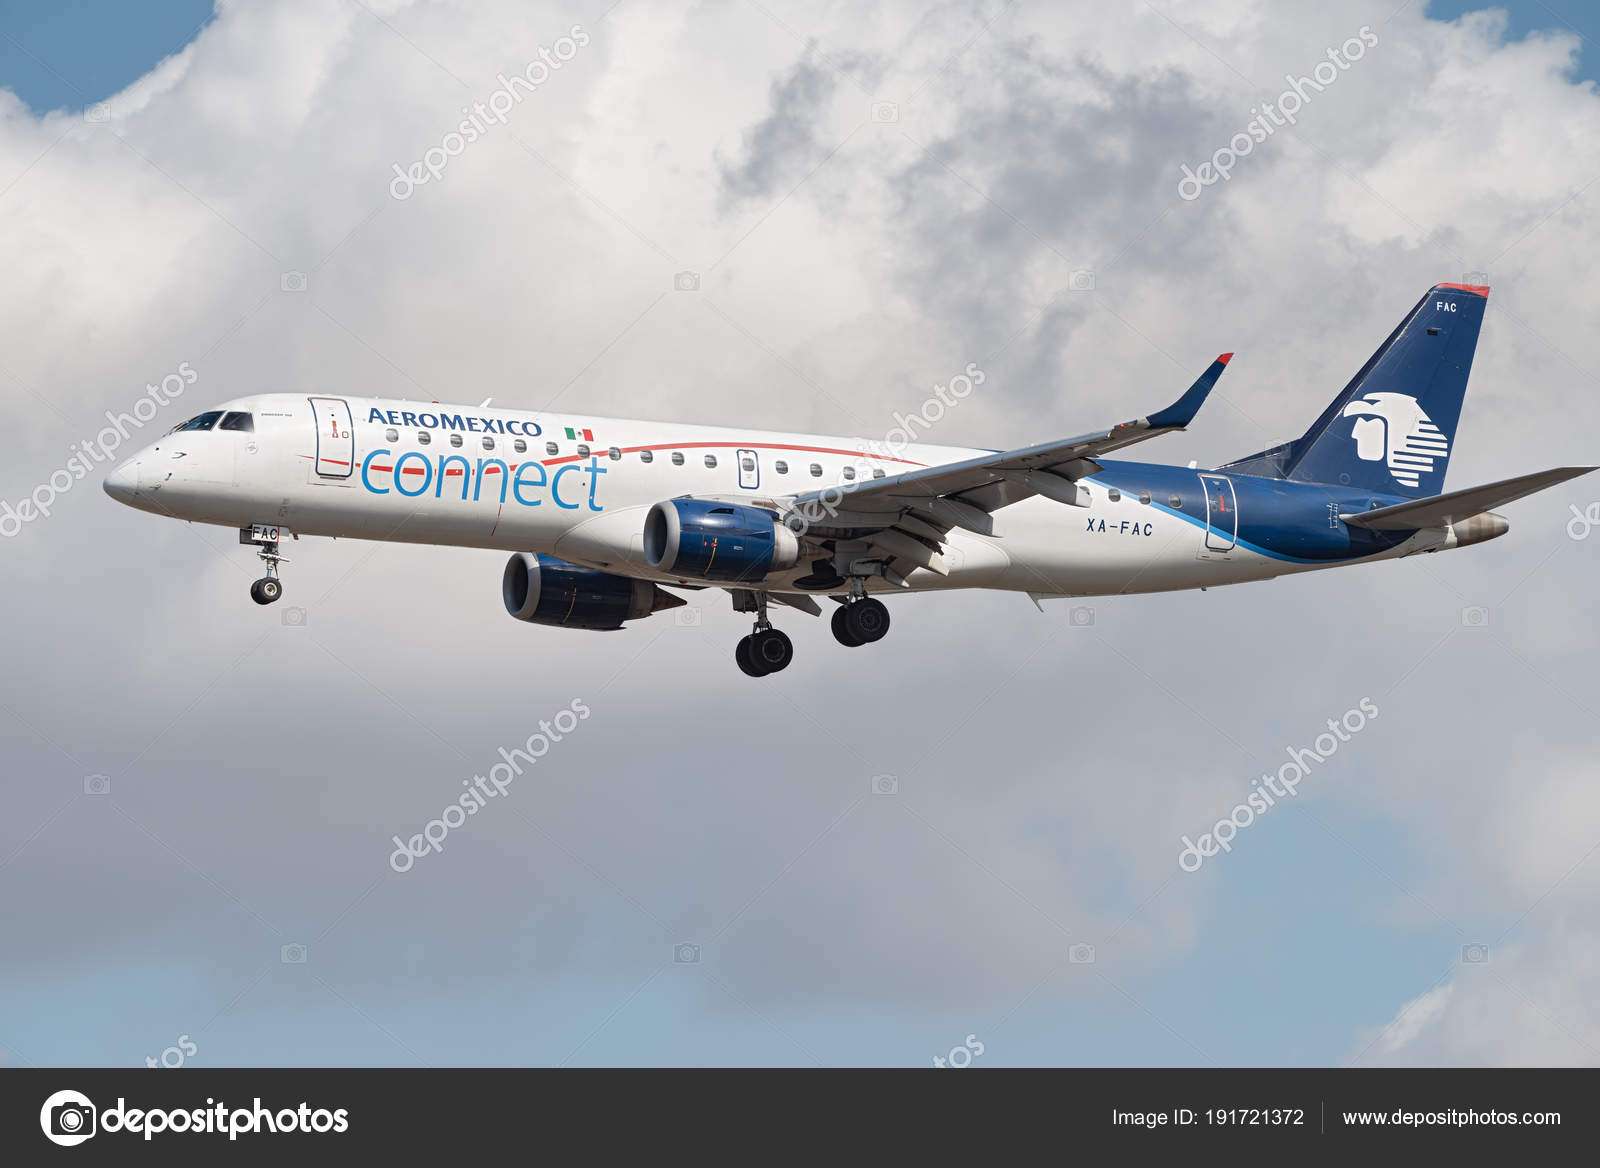 Aeromexico Connect Aircraft Embraer 190 Shown Just Landing Lax Los